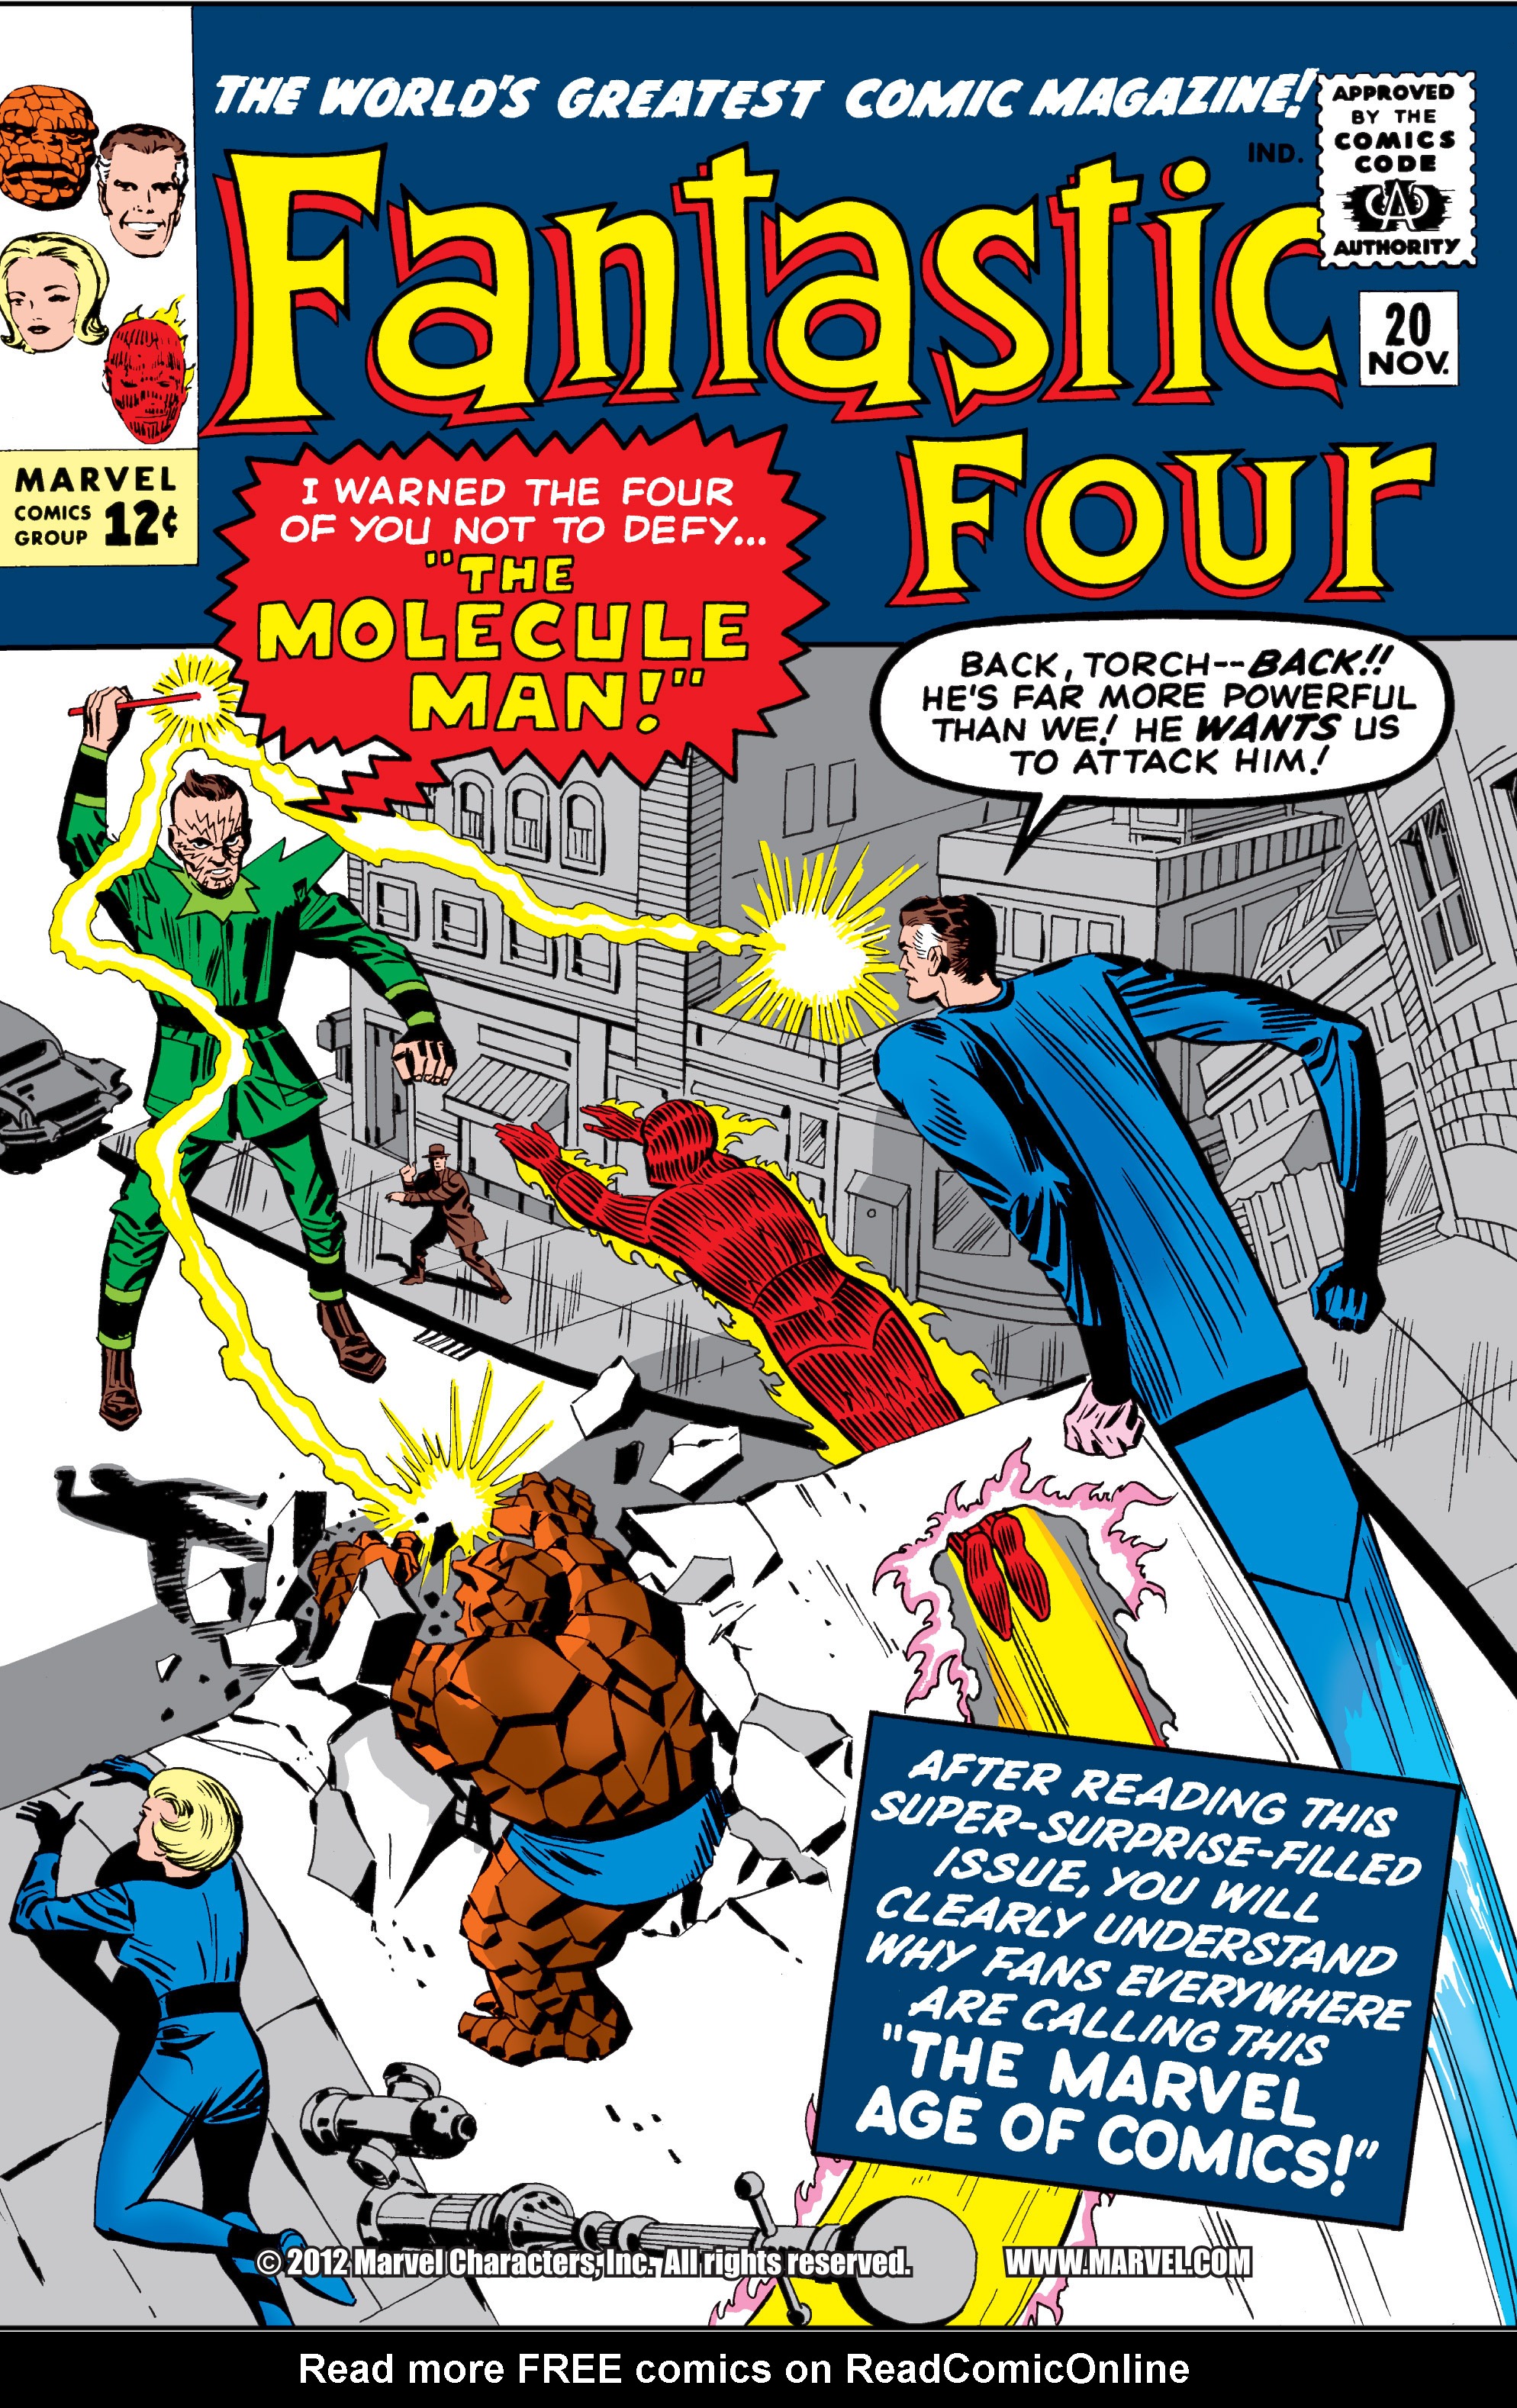 Read online Fantastic Four (1961) comic -  Issue #20 - 1